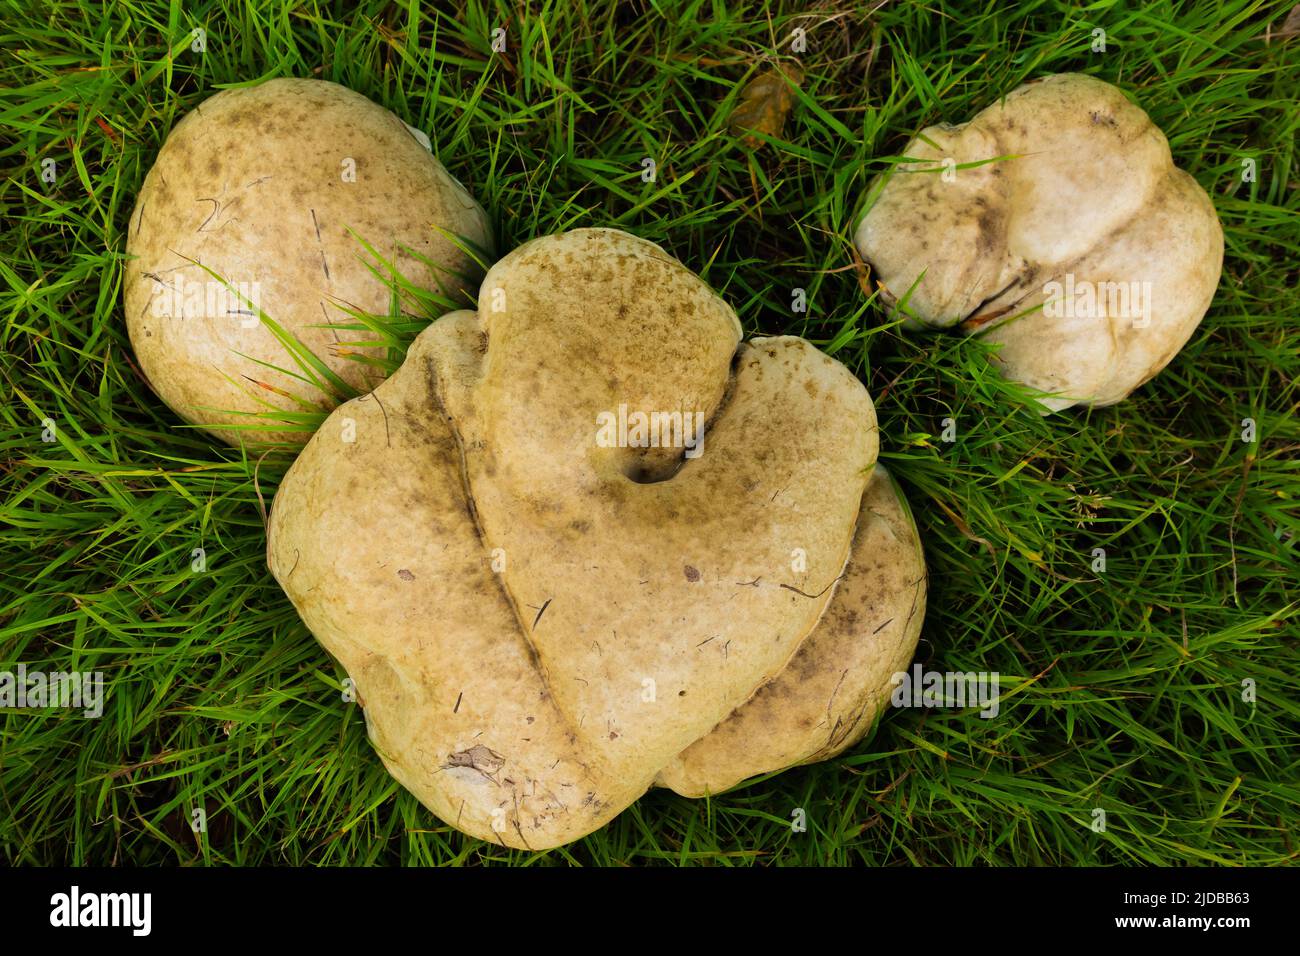 three giant puffball mushroom in a natural grass background Stock Photo